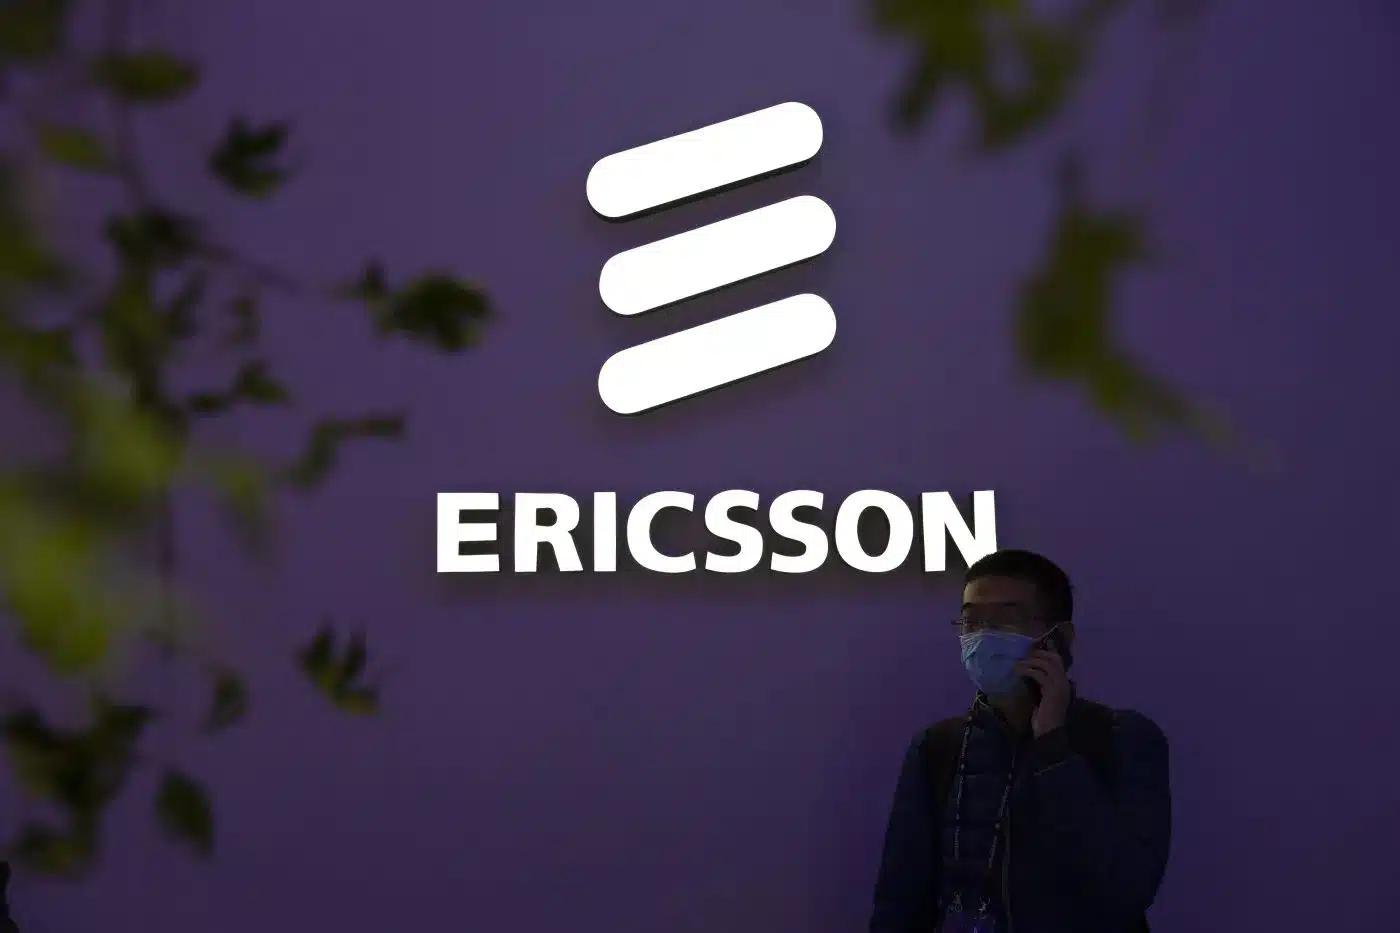 In Response to Difficulties in the Market, Ericsson Has Decided to Eliminate 1,200 Positions in Sweden